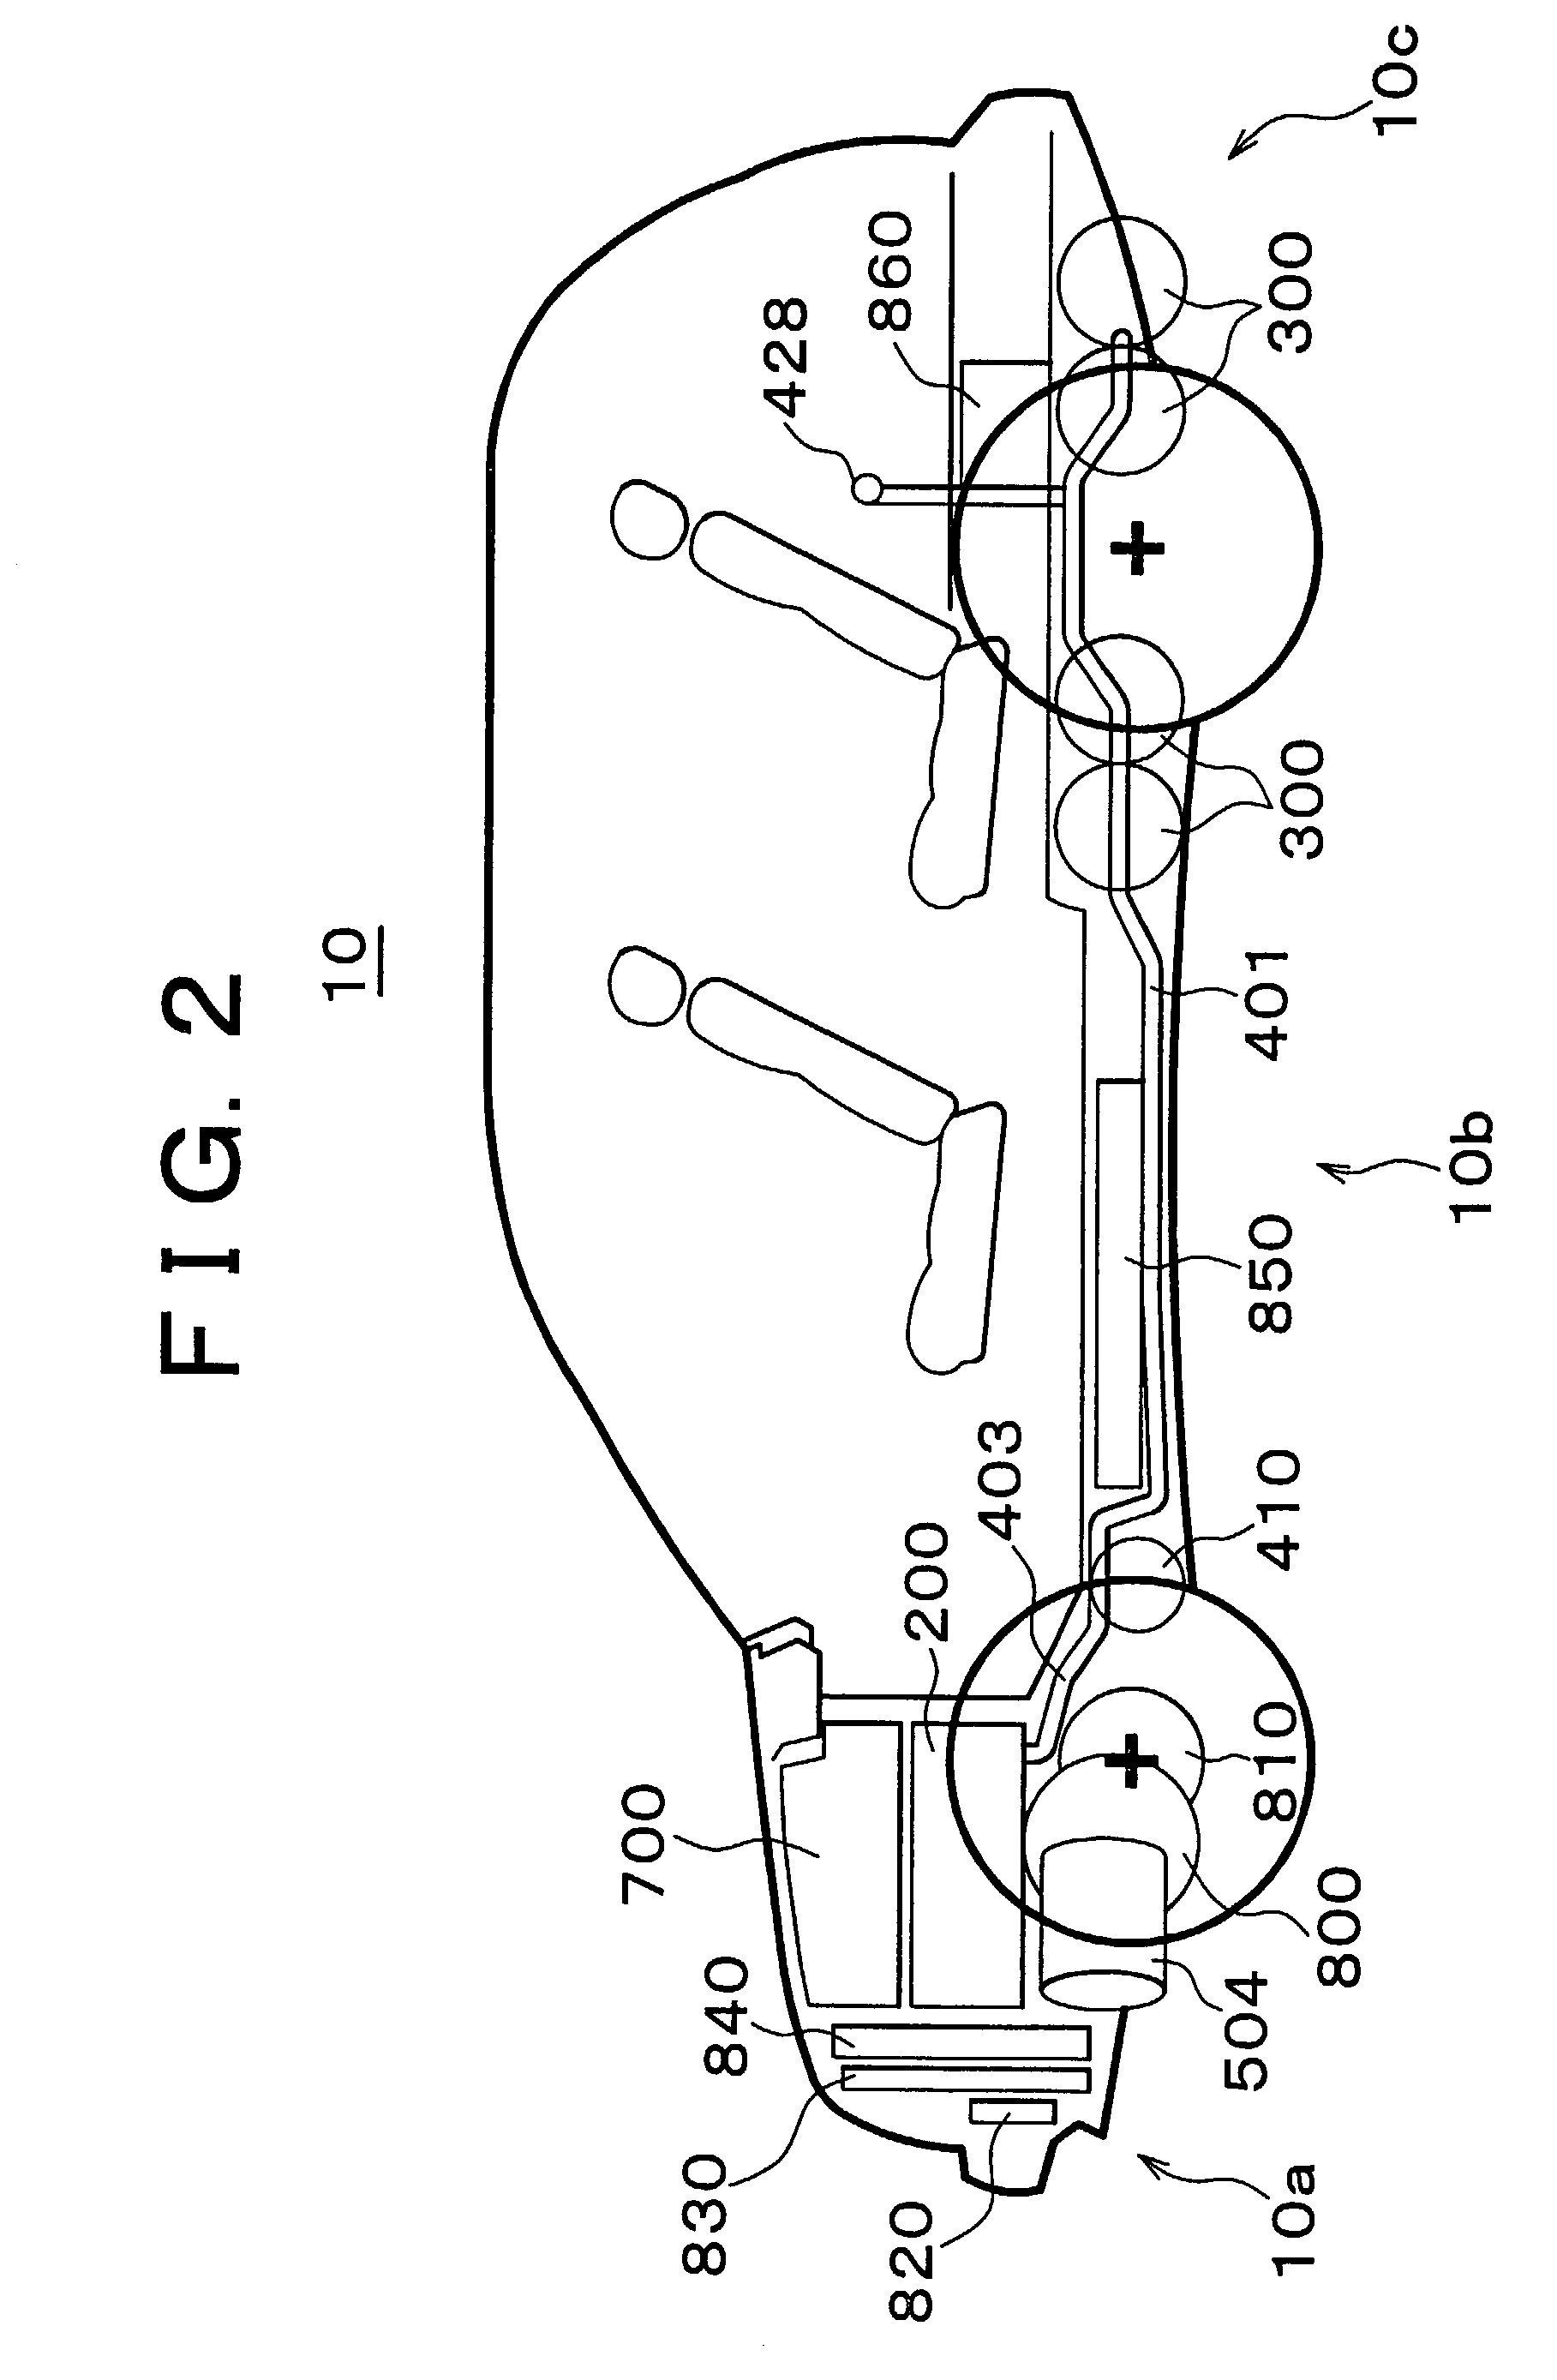 On-vehicle structure of fuel cell system